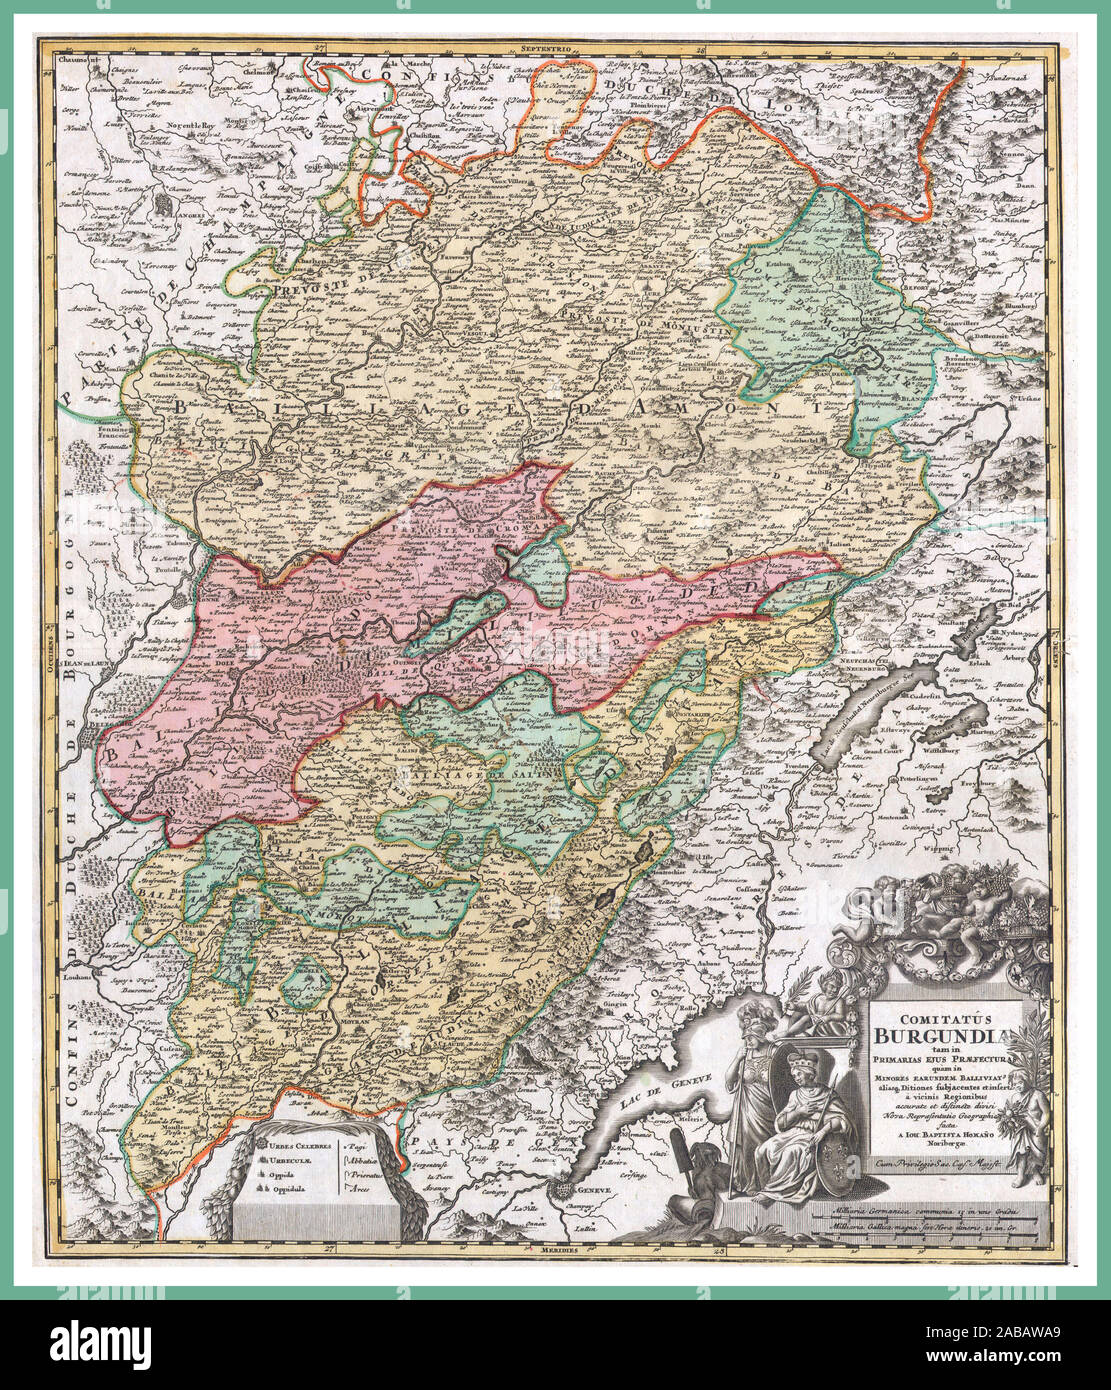 BURGUNDY FRANCE HISTORIC VINTAGE MAP Homann’s 1716 map of Burgundy, one of France’s most important wine regions. Extends to include Lake Geneva southwest, Lorraine north,  Champagne and Angers to northwest and Bourgogne to the west.  A rare vintage historic map. Produced by J. H. Homann for inclusion in the Grosser Atlas published in Nuremberg, 1716. Stock Photo